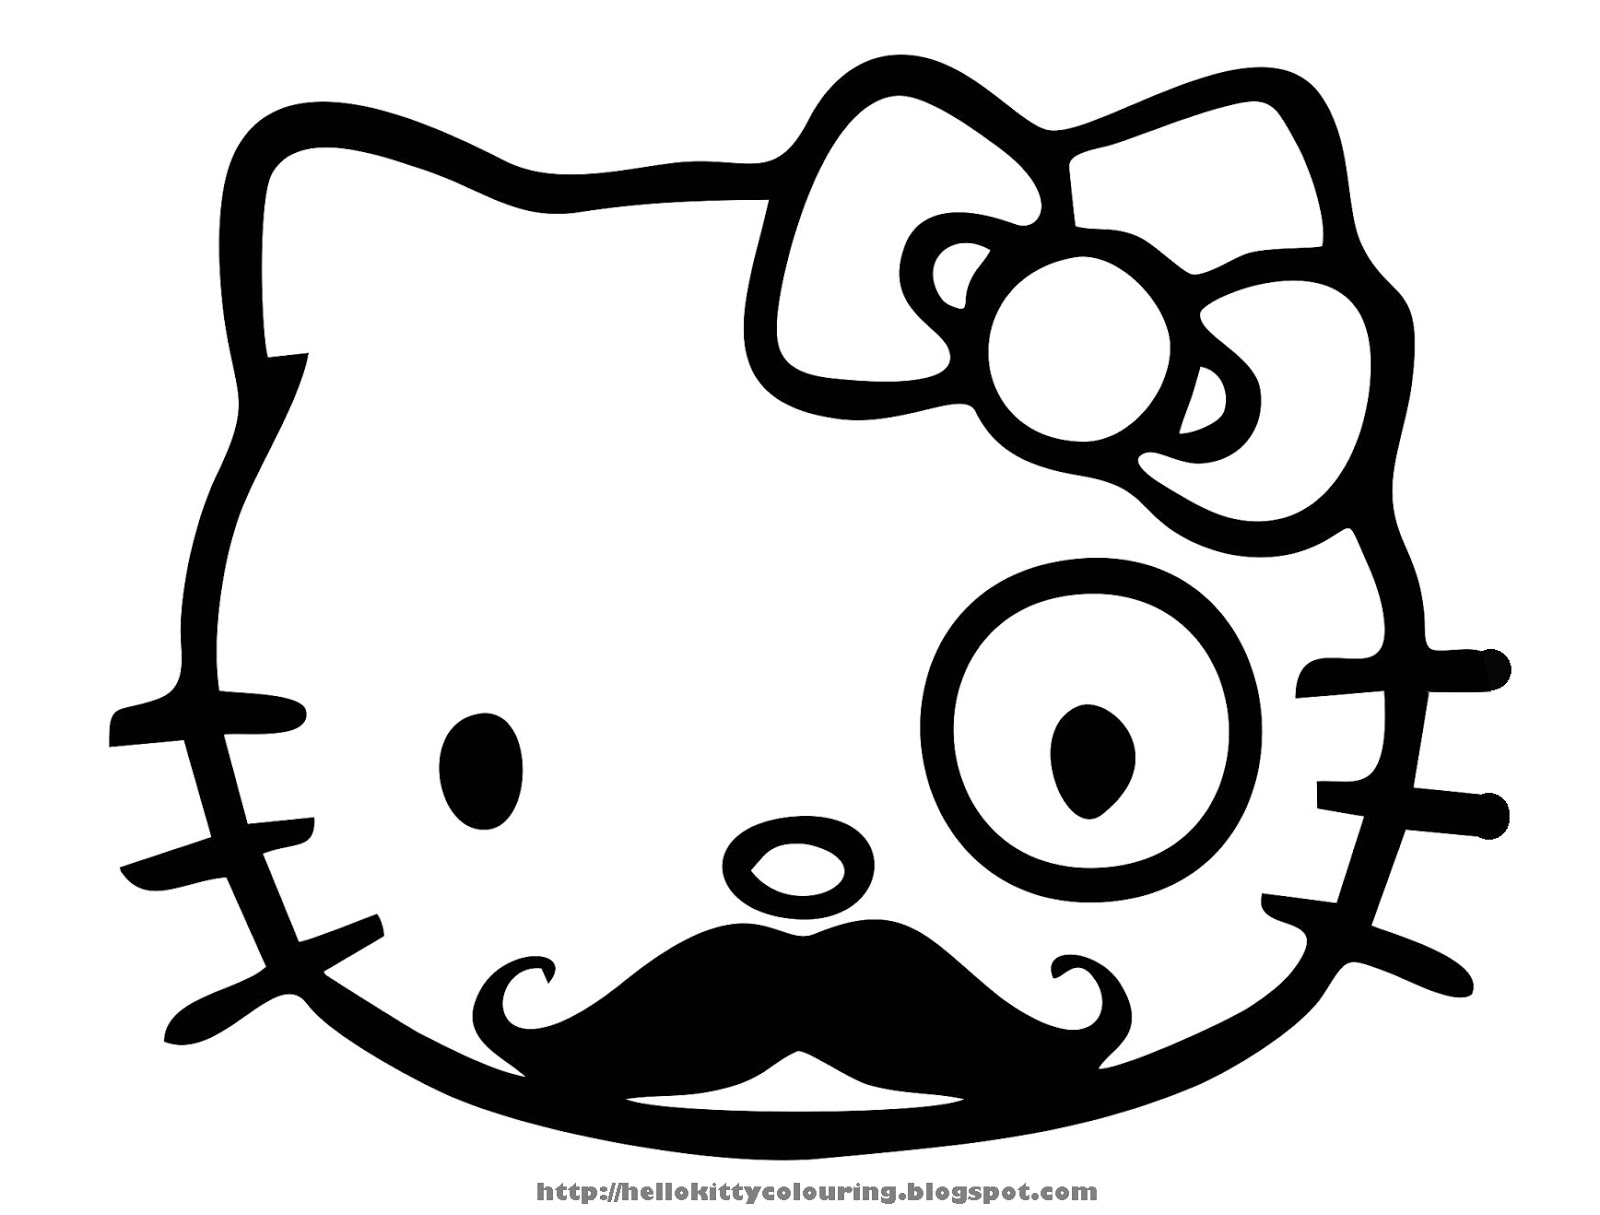 Hello kitty coloring pages wallpapers 1600x1215